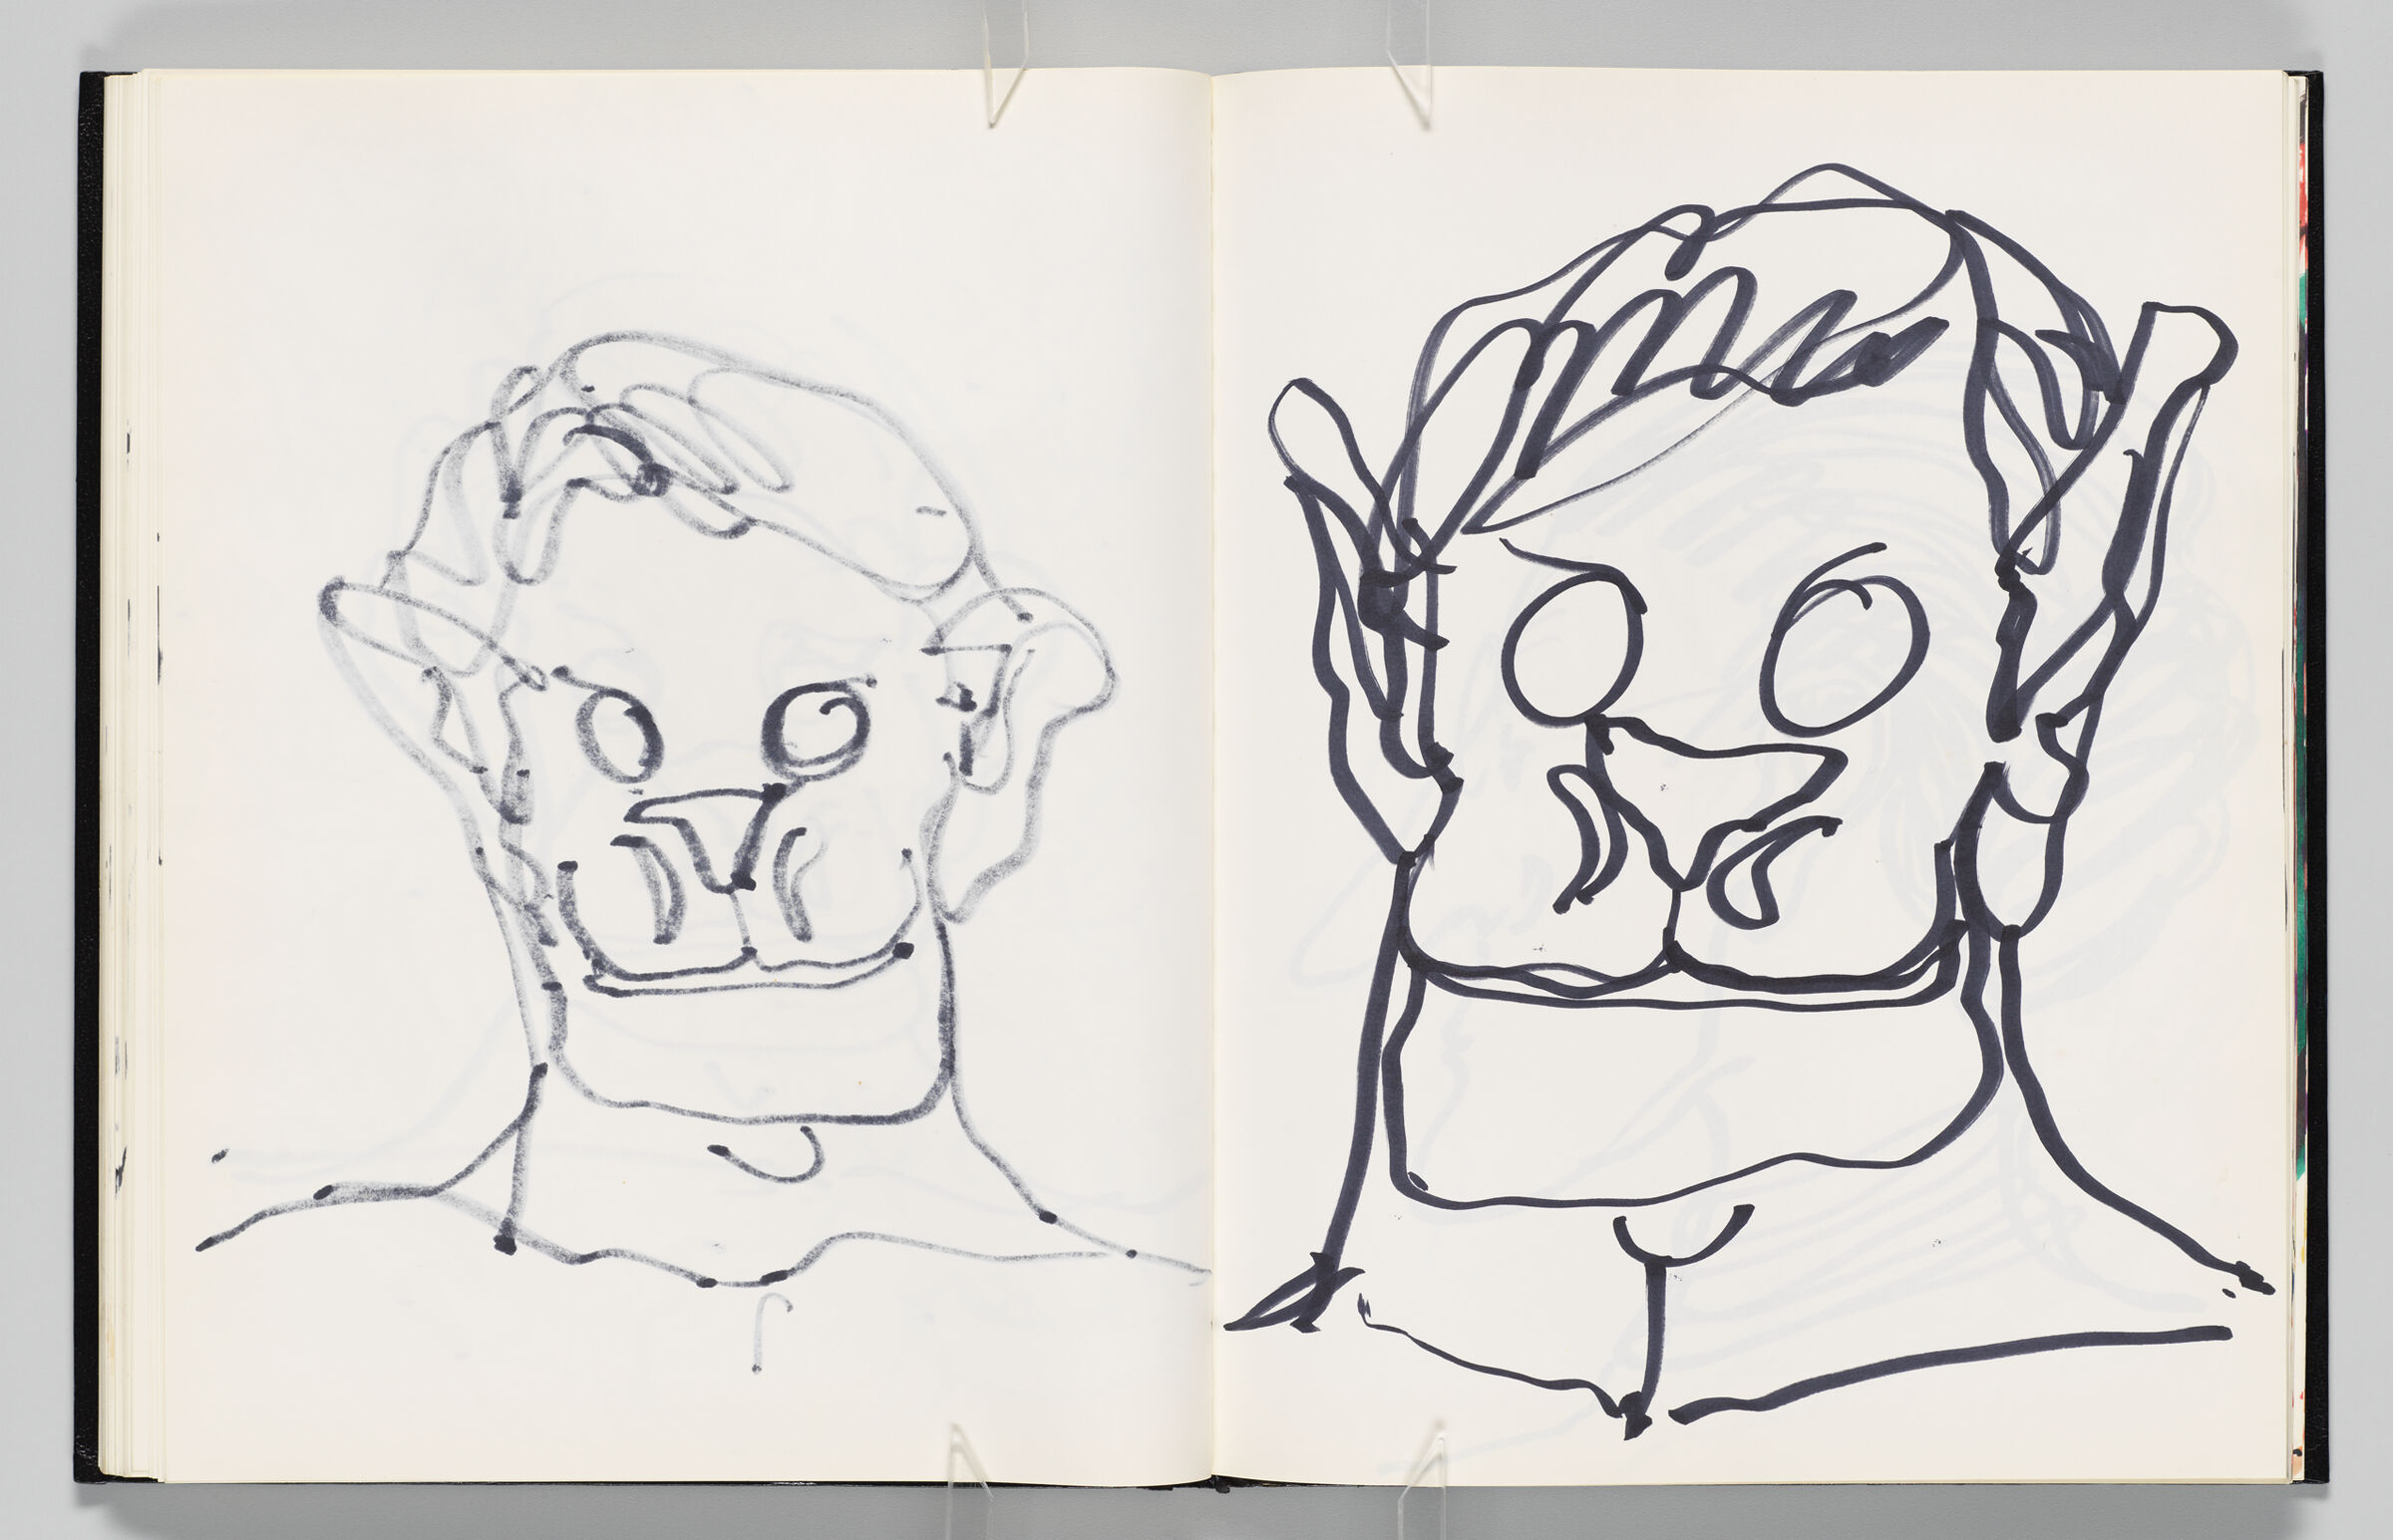 Untitled (Bleed-Through Of Previous Page, Left Page); Untitled (Dog-Faced Man, Right Page)